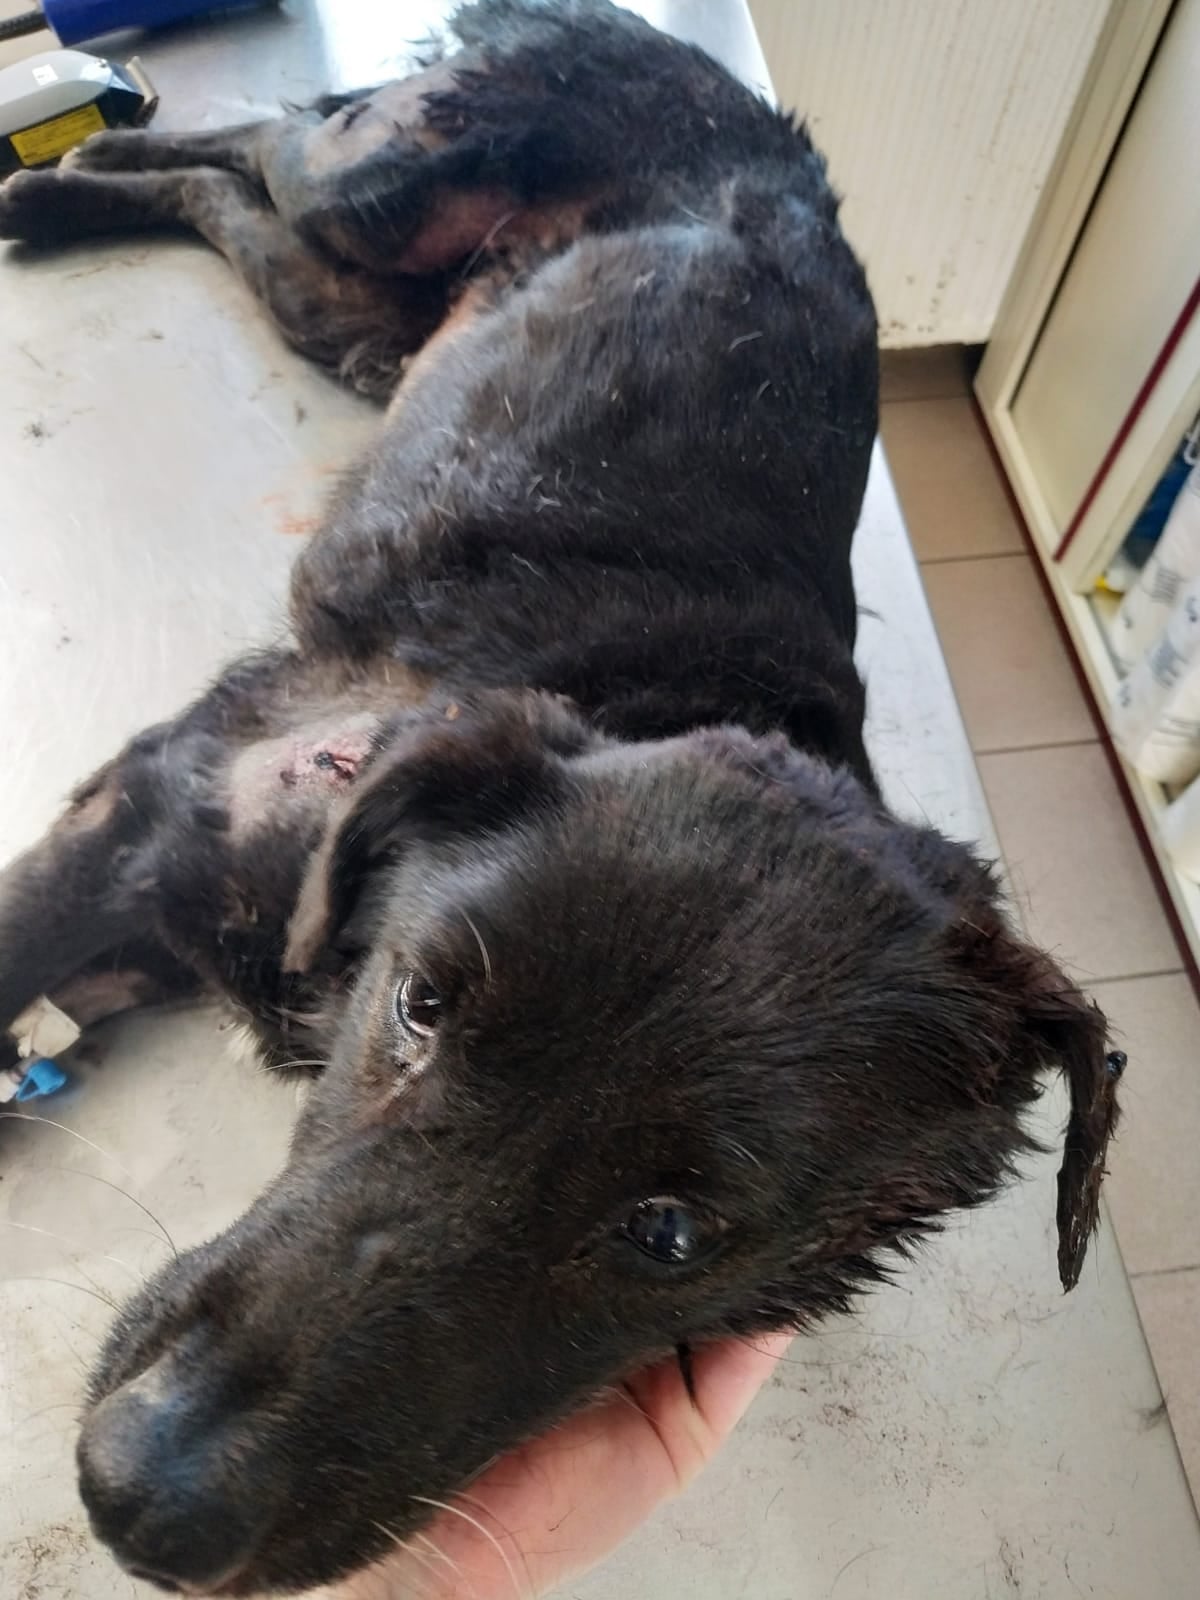 A tragic and unfortunately not rare case on the streets of Romania